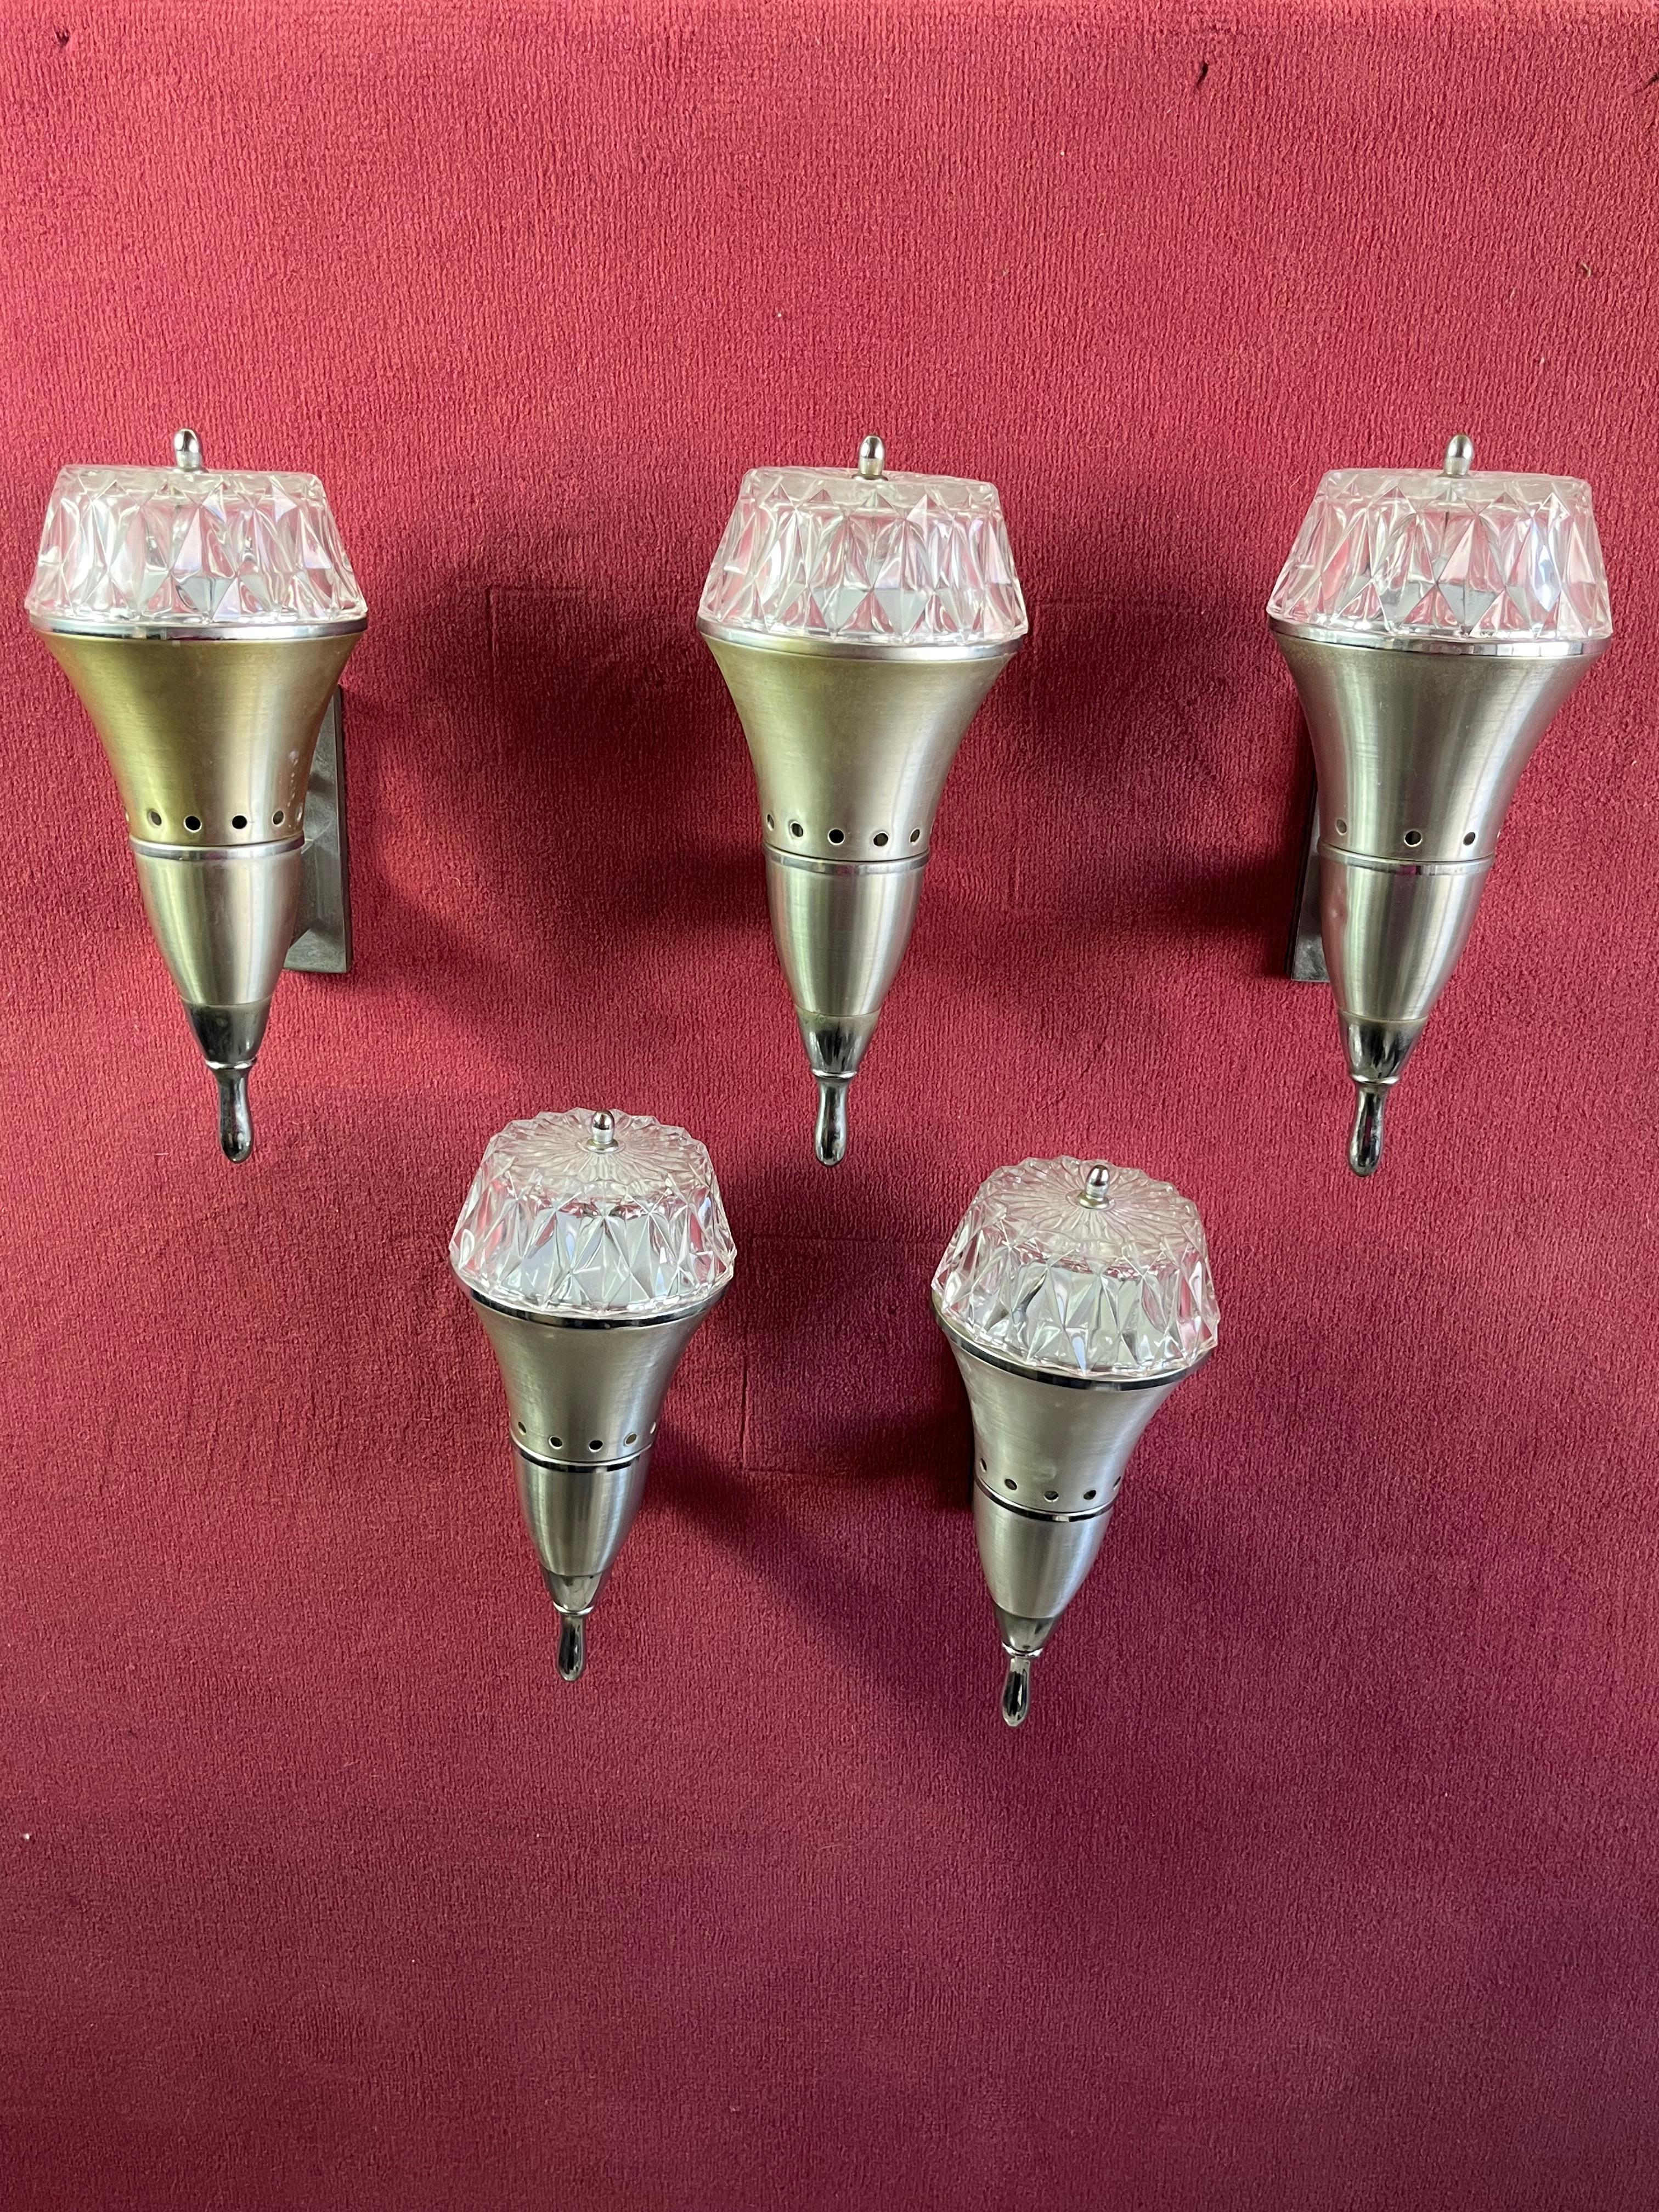 Set of 5 Mid-Century Wall Lamps Attributed To Ignazio Gardella For Azucena 1960s For Sale 5